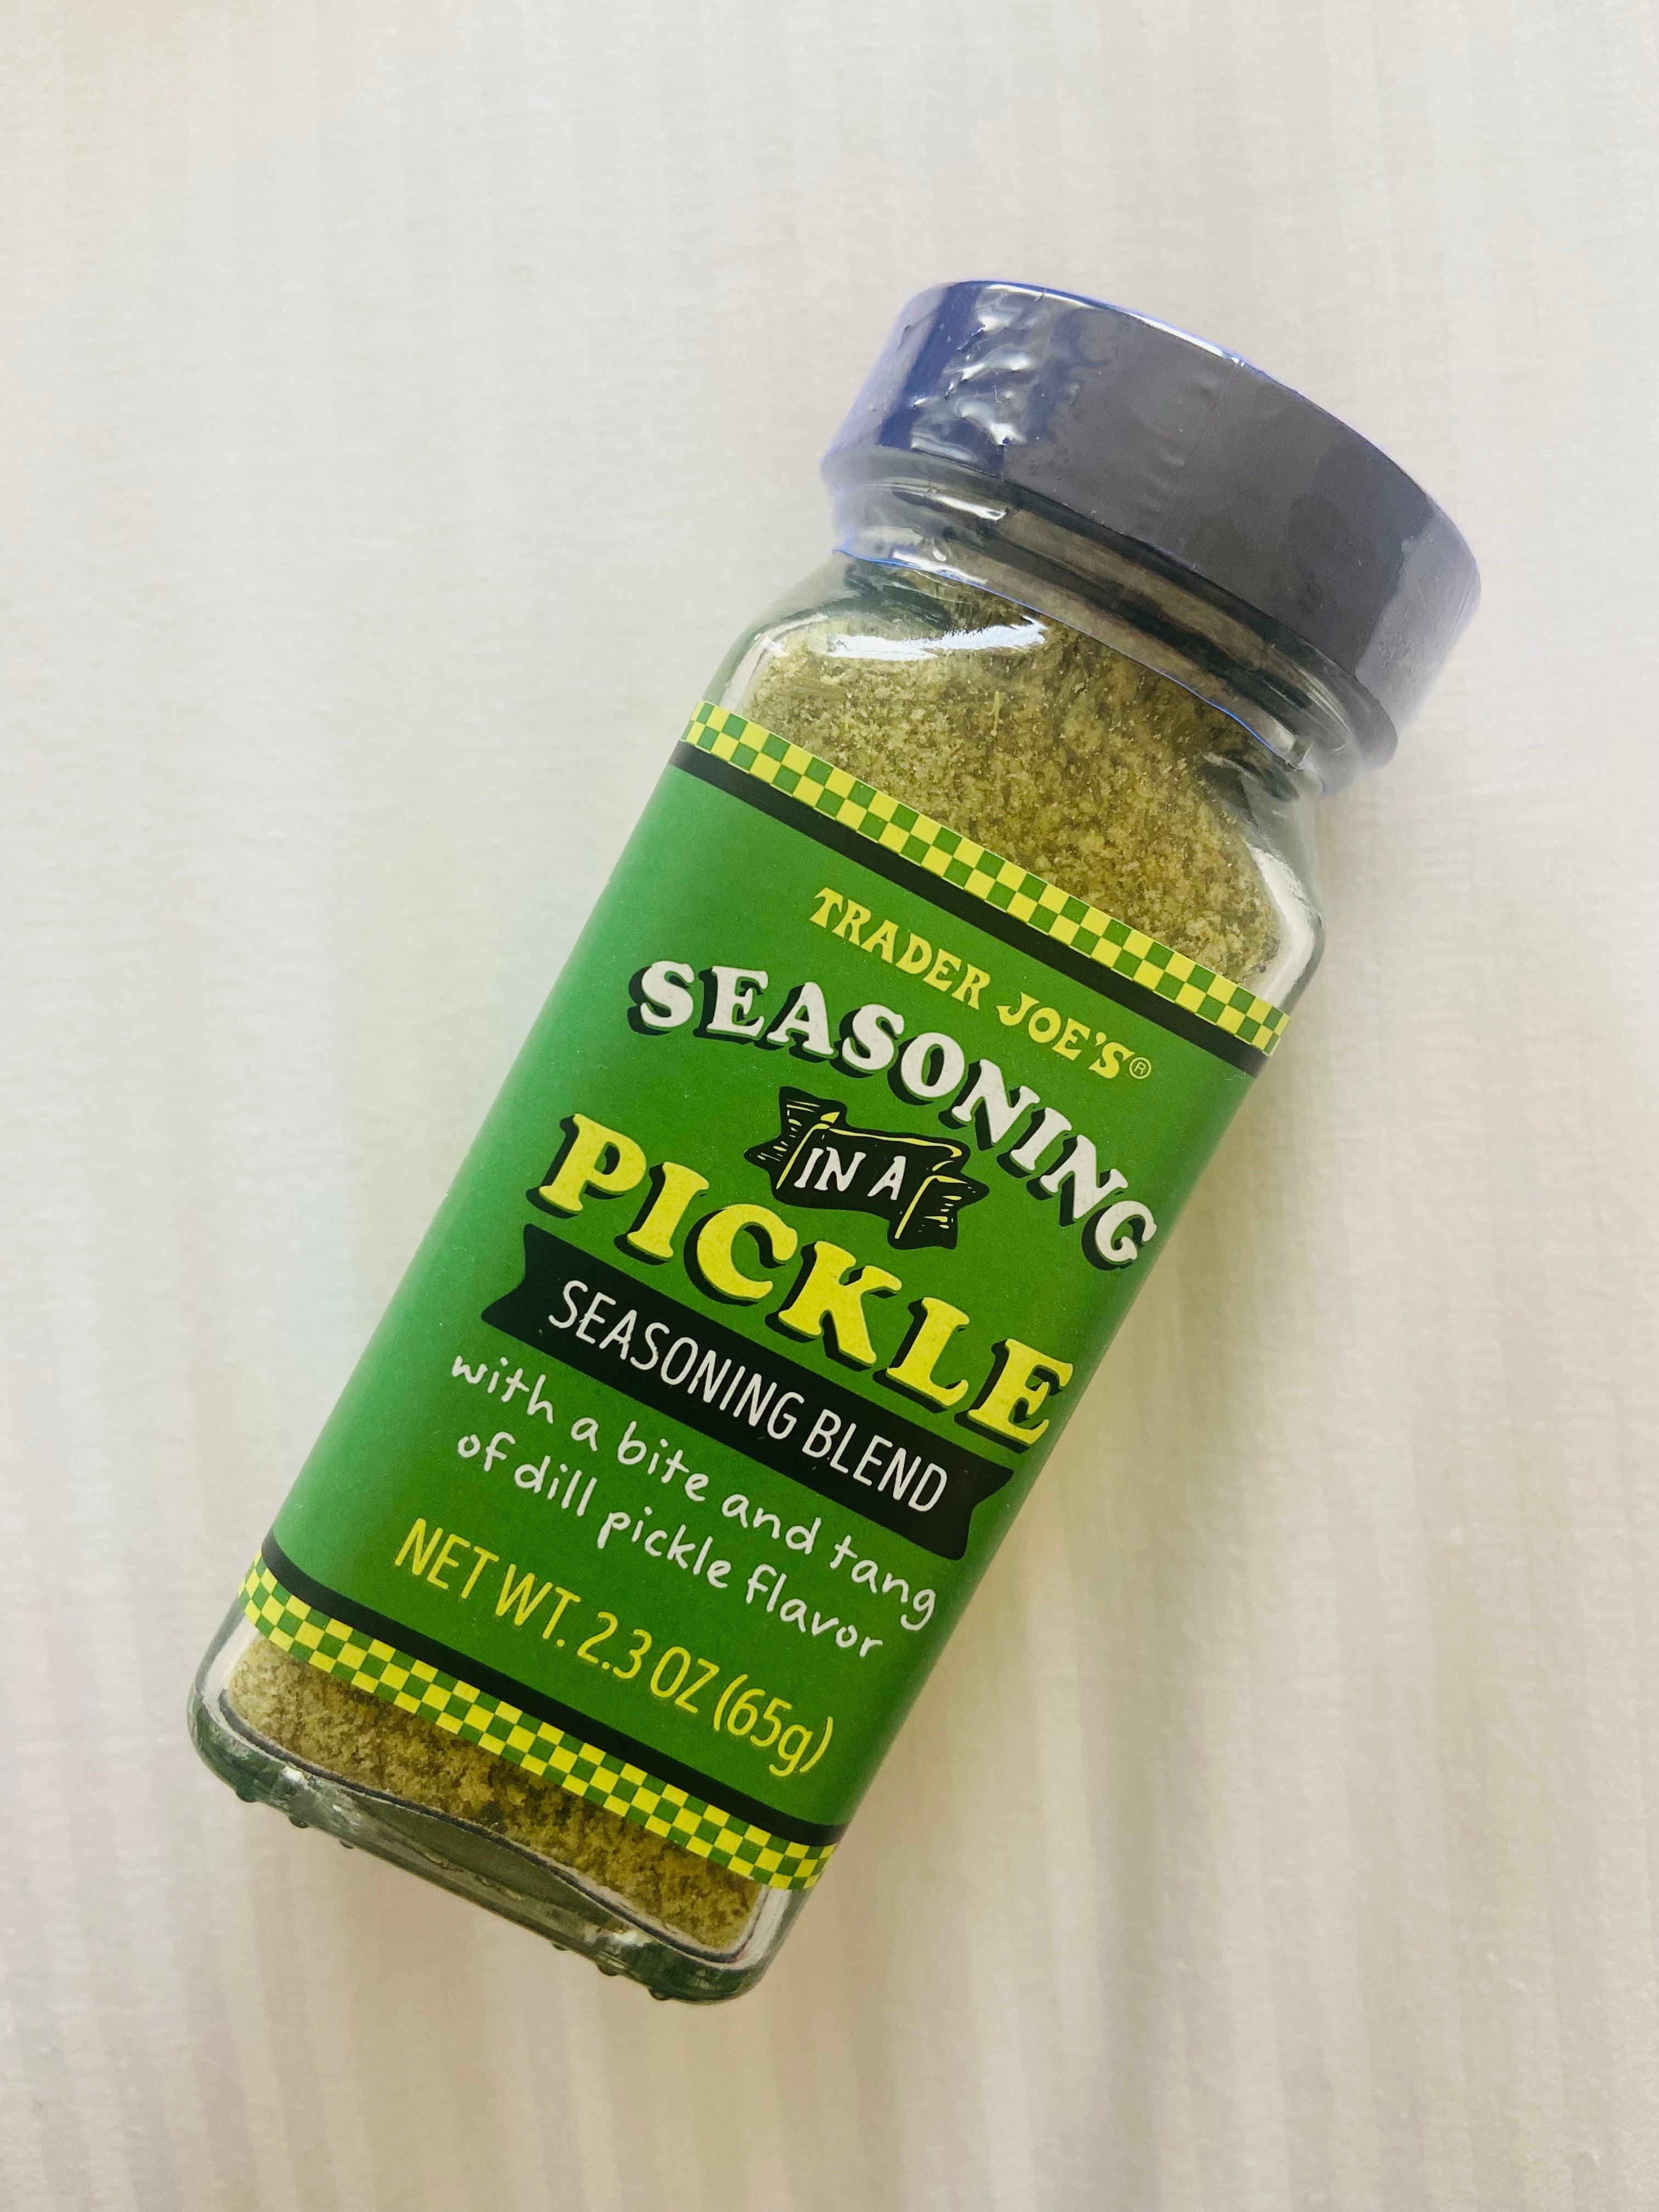 Seasoning in a Pickle - any suggestions as to what to do with it? Purchased  on a whim. : r/traderjoes